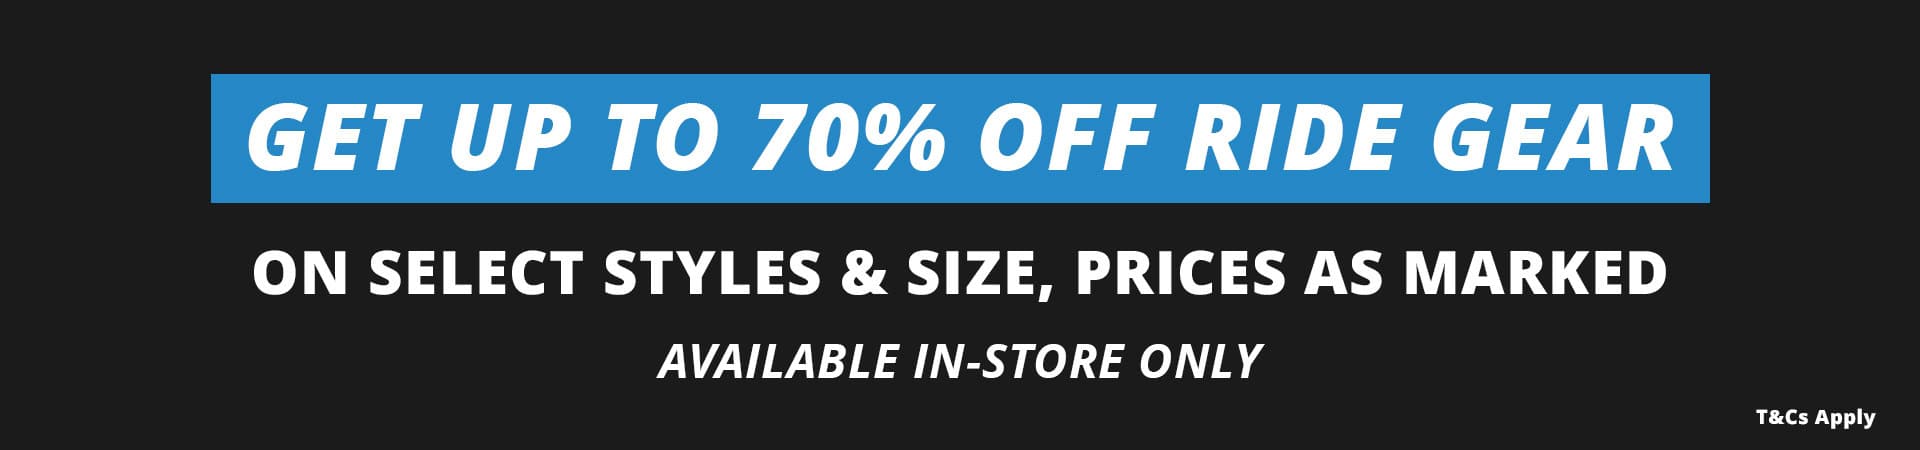 Get up to 70 per cent off ride gear on select style and size prices as marked. Available in-store only.